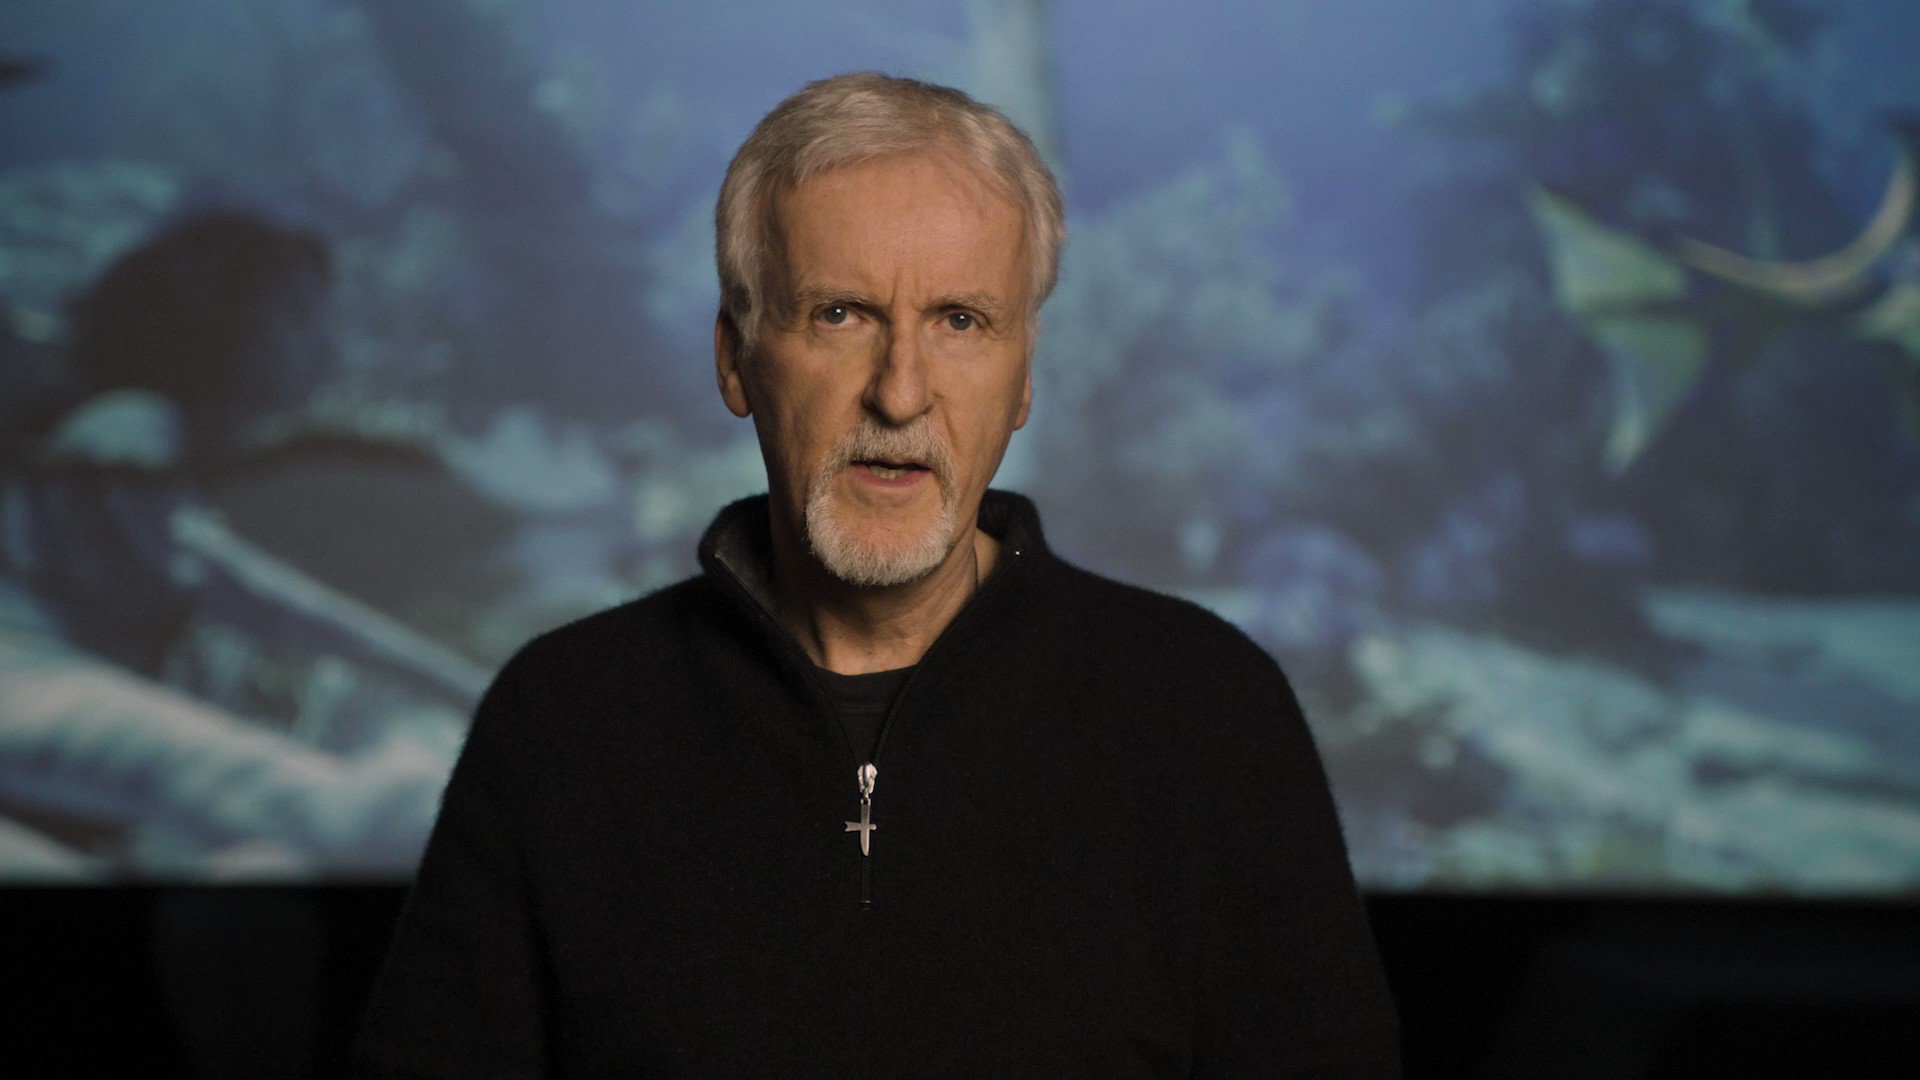 James Cameron on Twitter: "Thank you to all of you who have already taken the journey back to Pandora. #AvatarTheWayOfWater https://t.co/HSyjB7uEik" / Twitter